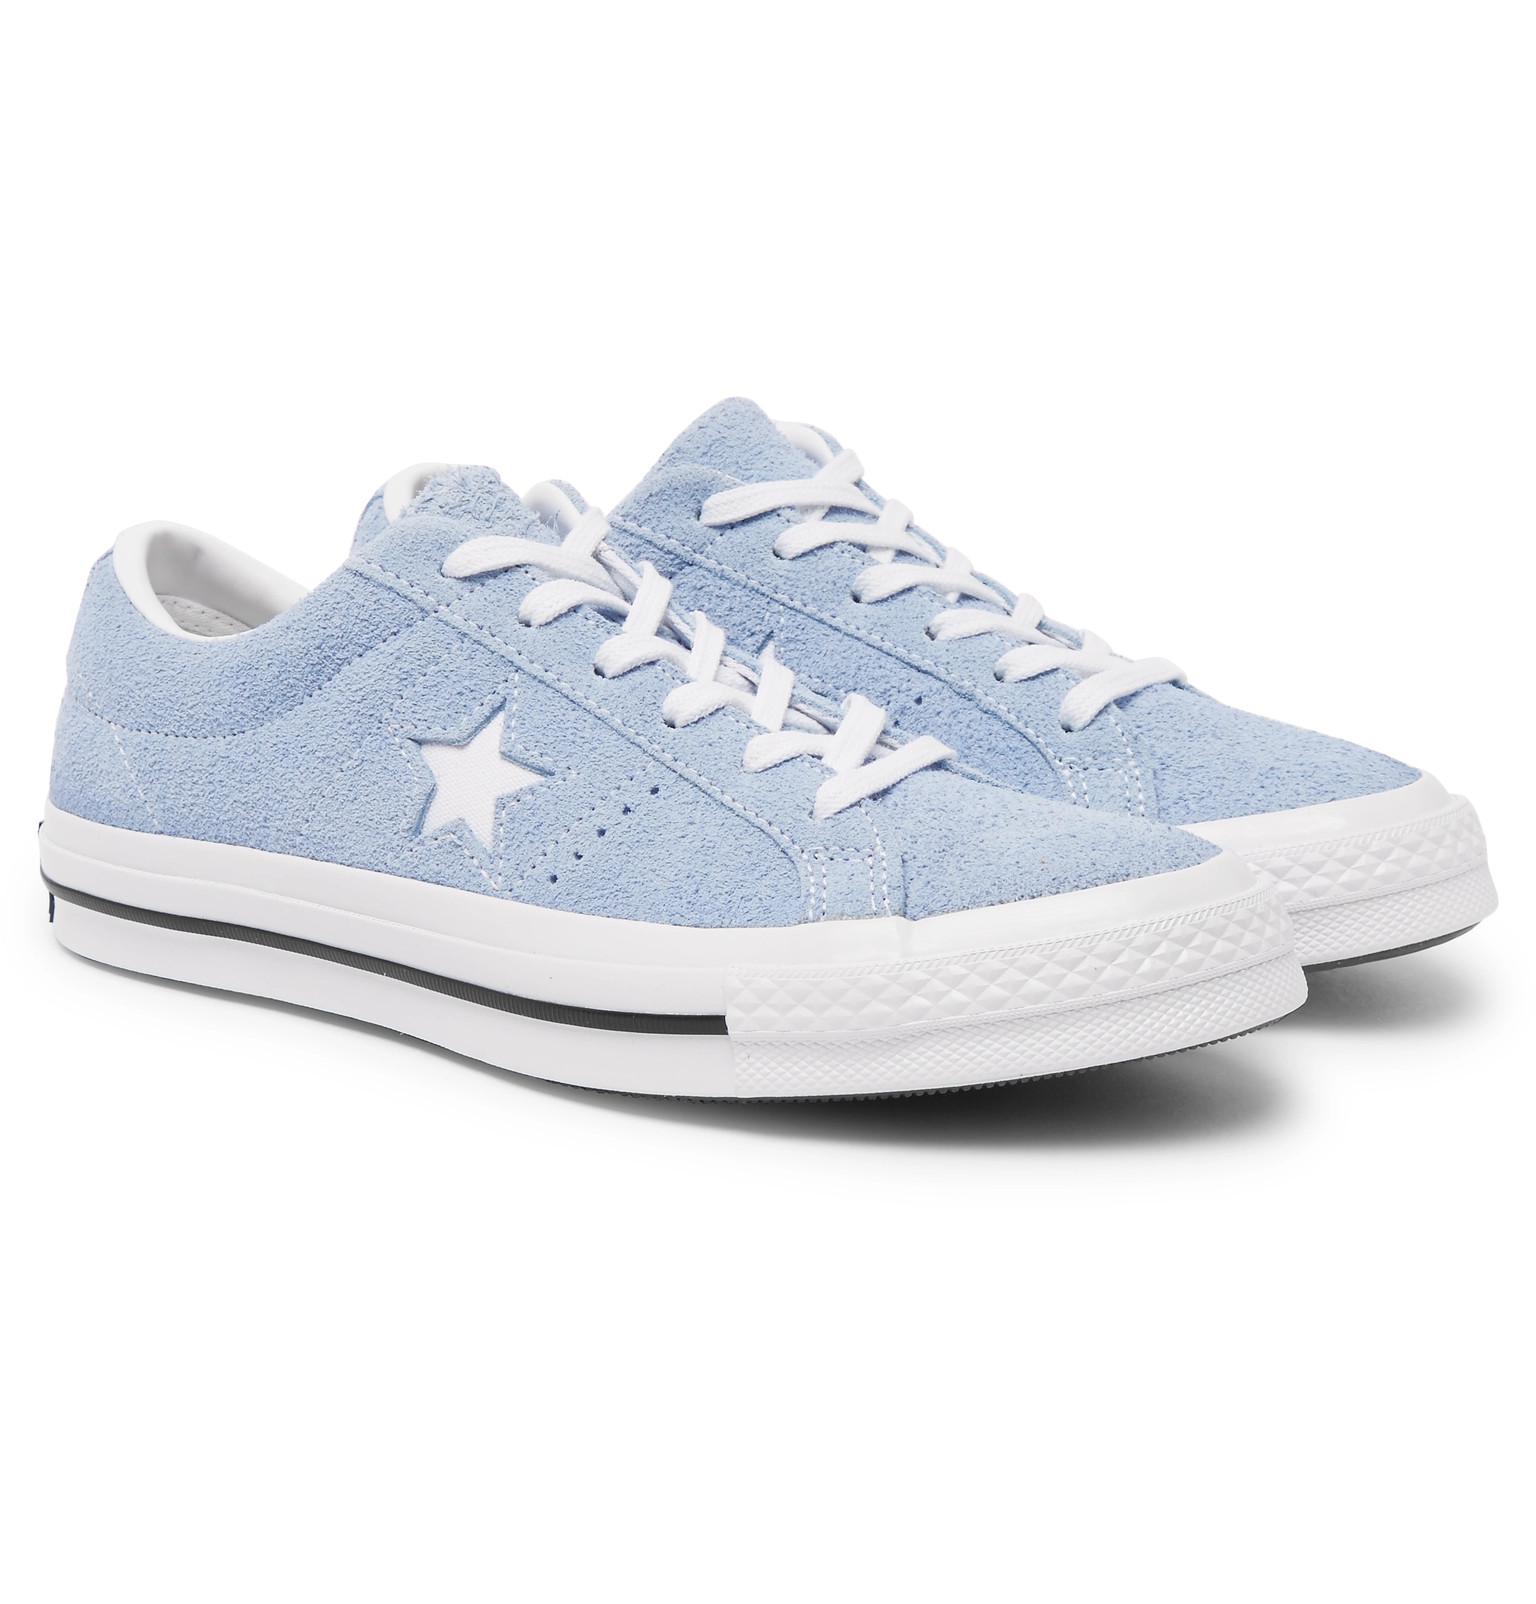 Converse One Star Ox Suede Sneakers in 